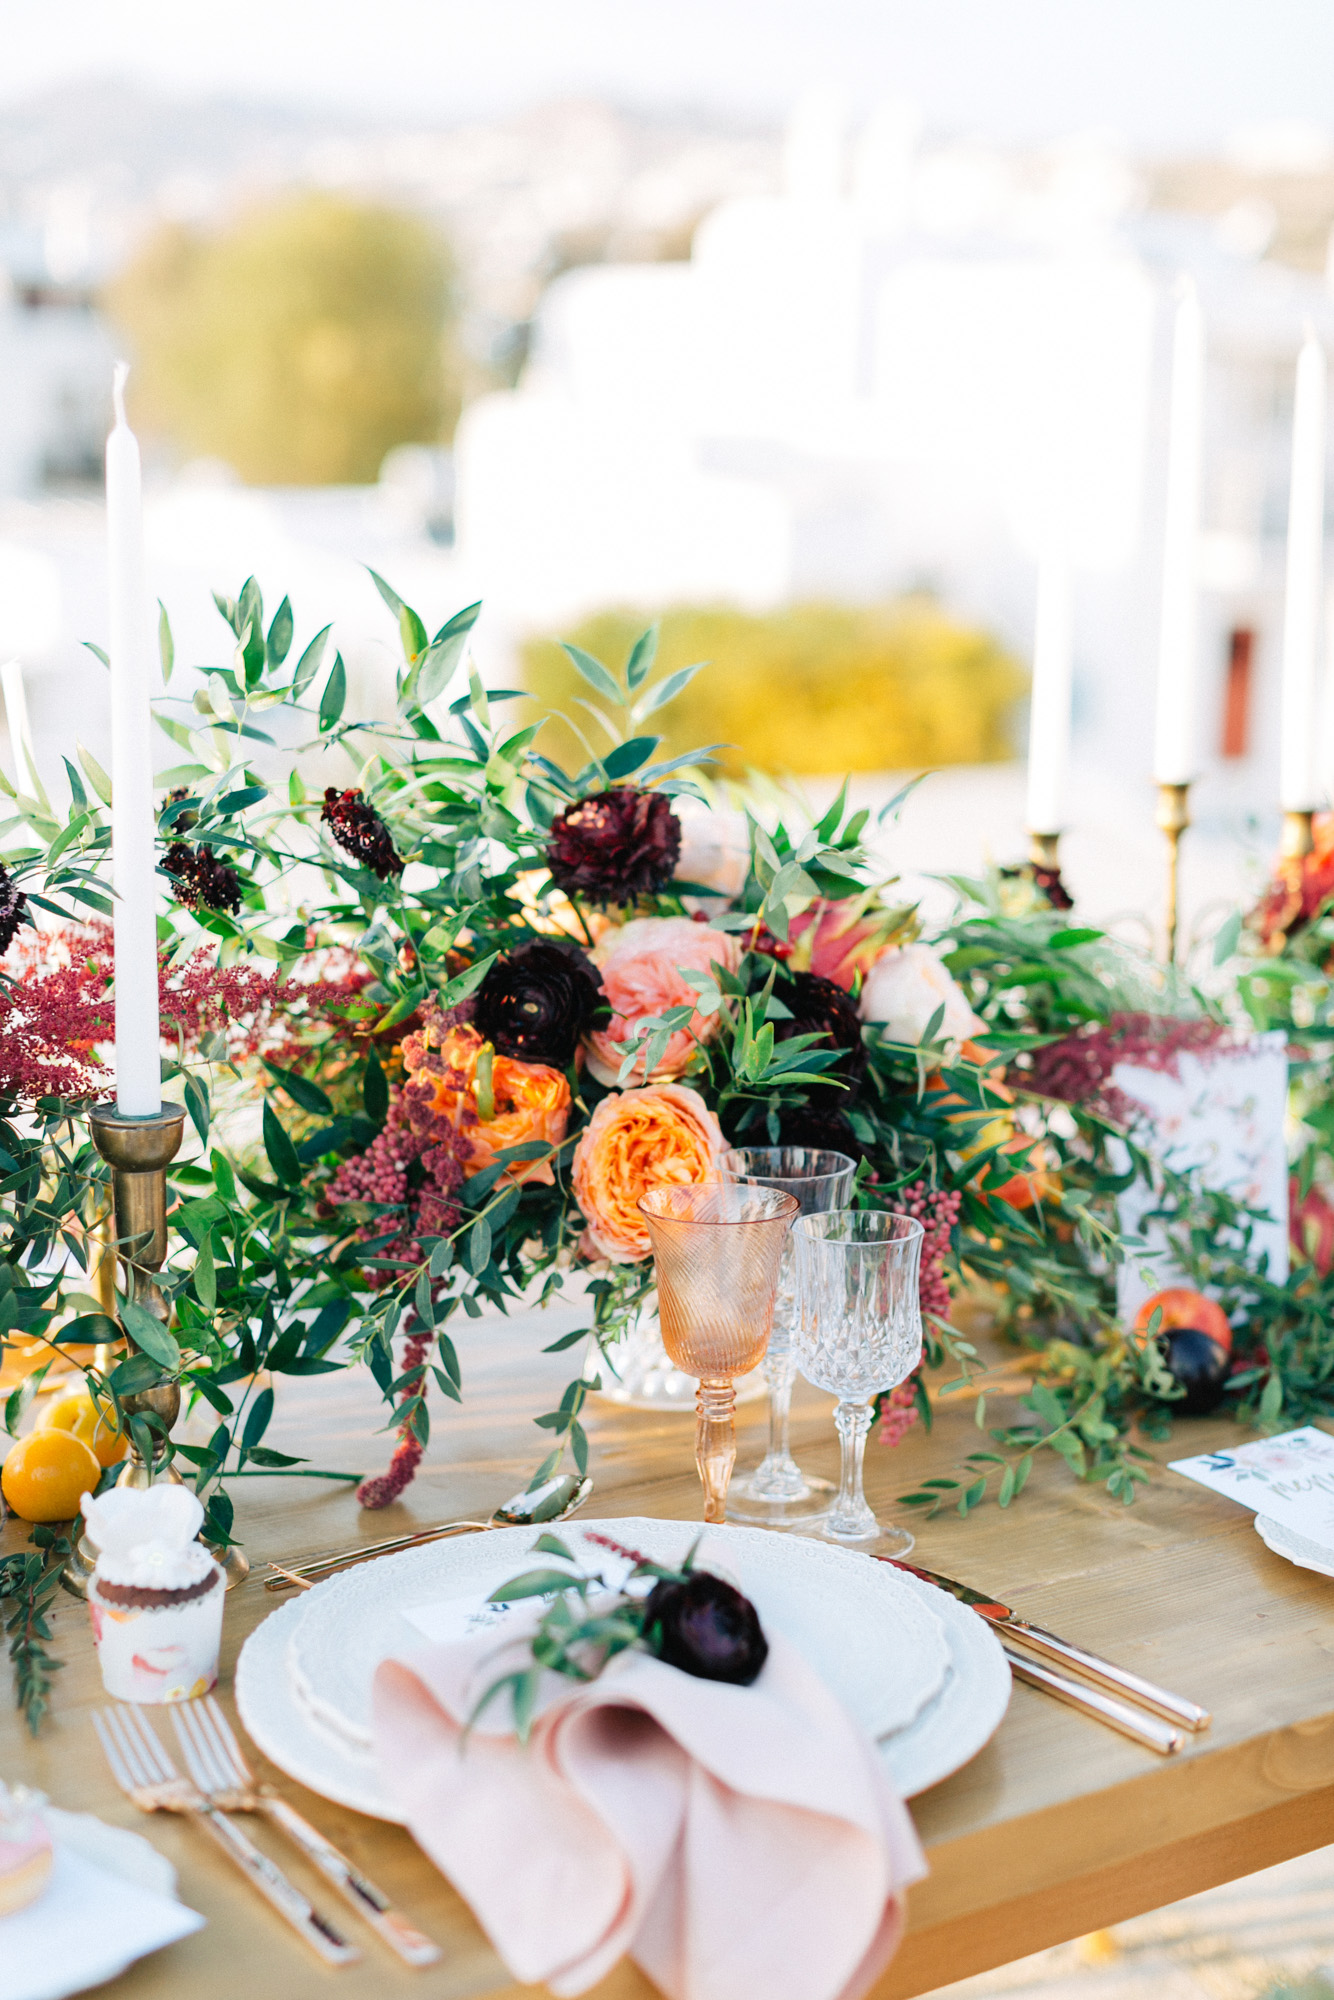 Rich and colorful table setting and flowers for a destination wedding in Mykonos, Greece.